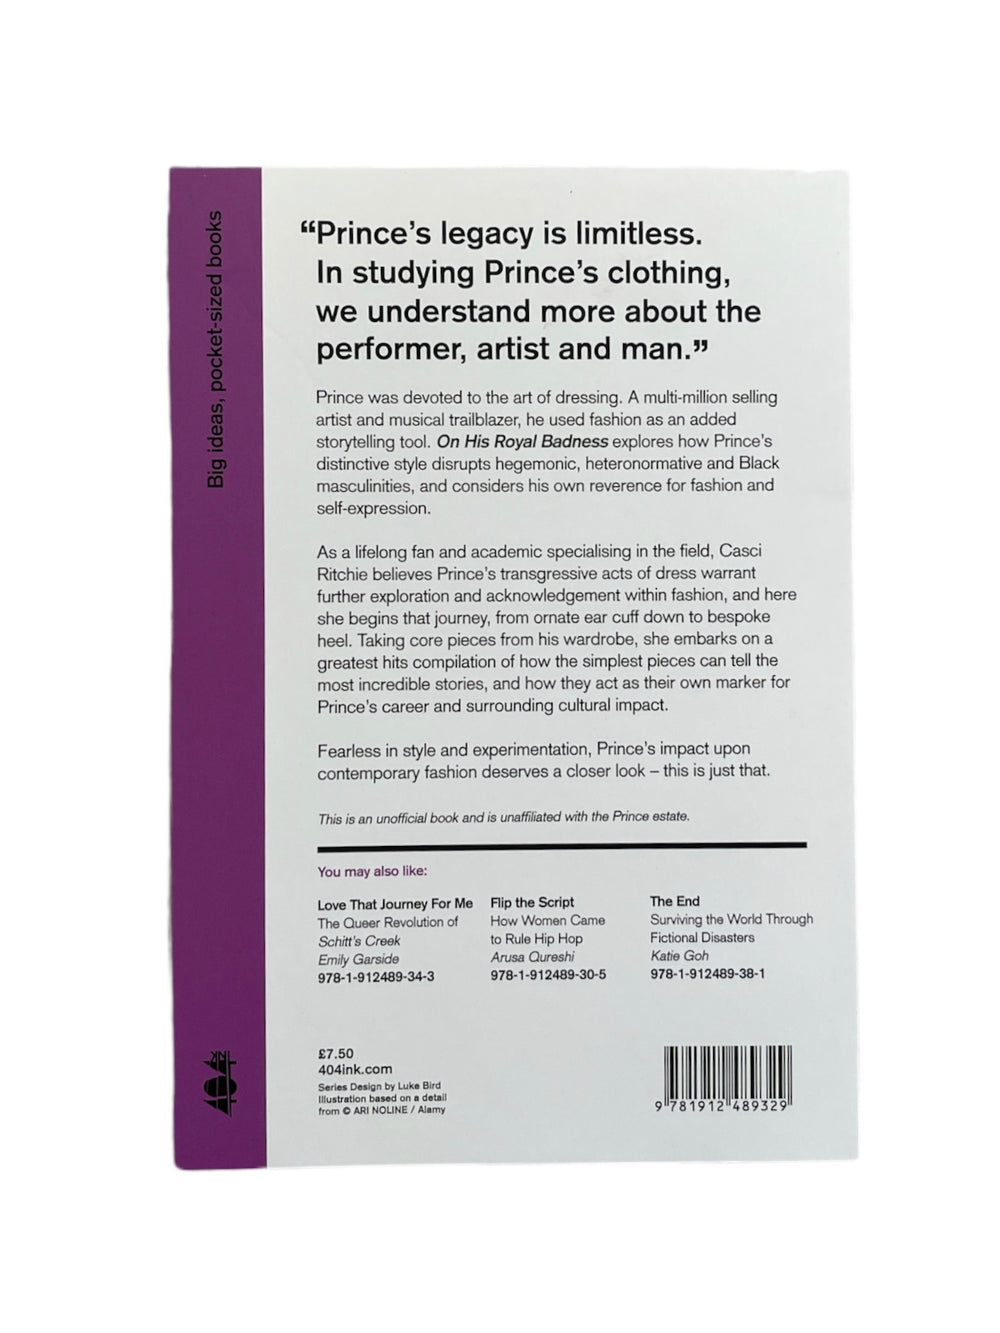 Prince On His Royal Badness The Life and Legacy of Prince's Fashion Soft Backed Book Casci Ritchie